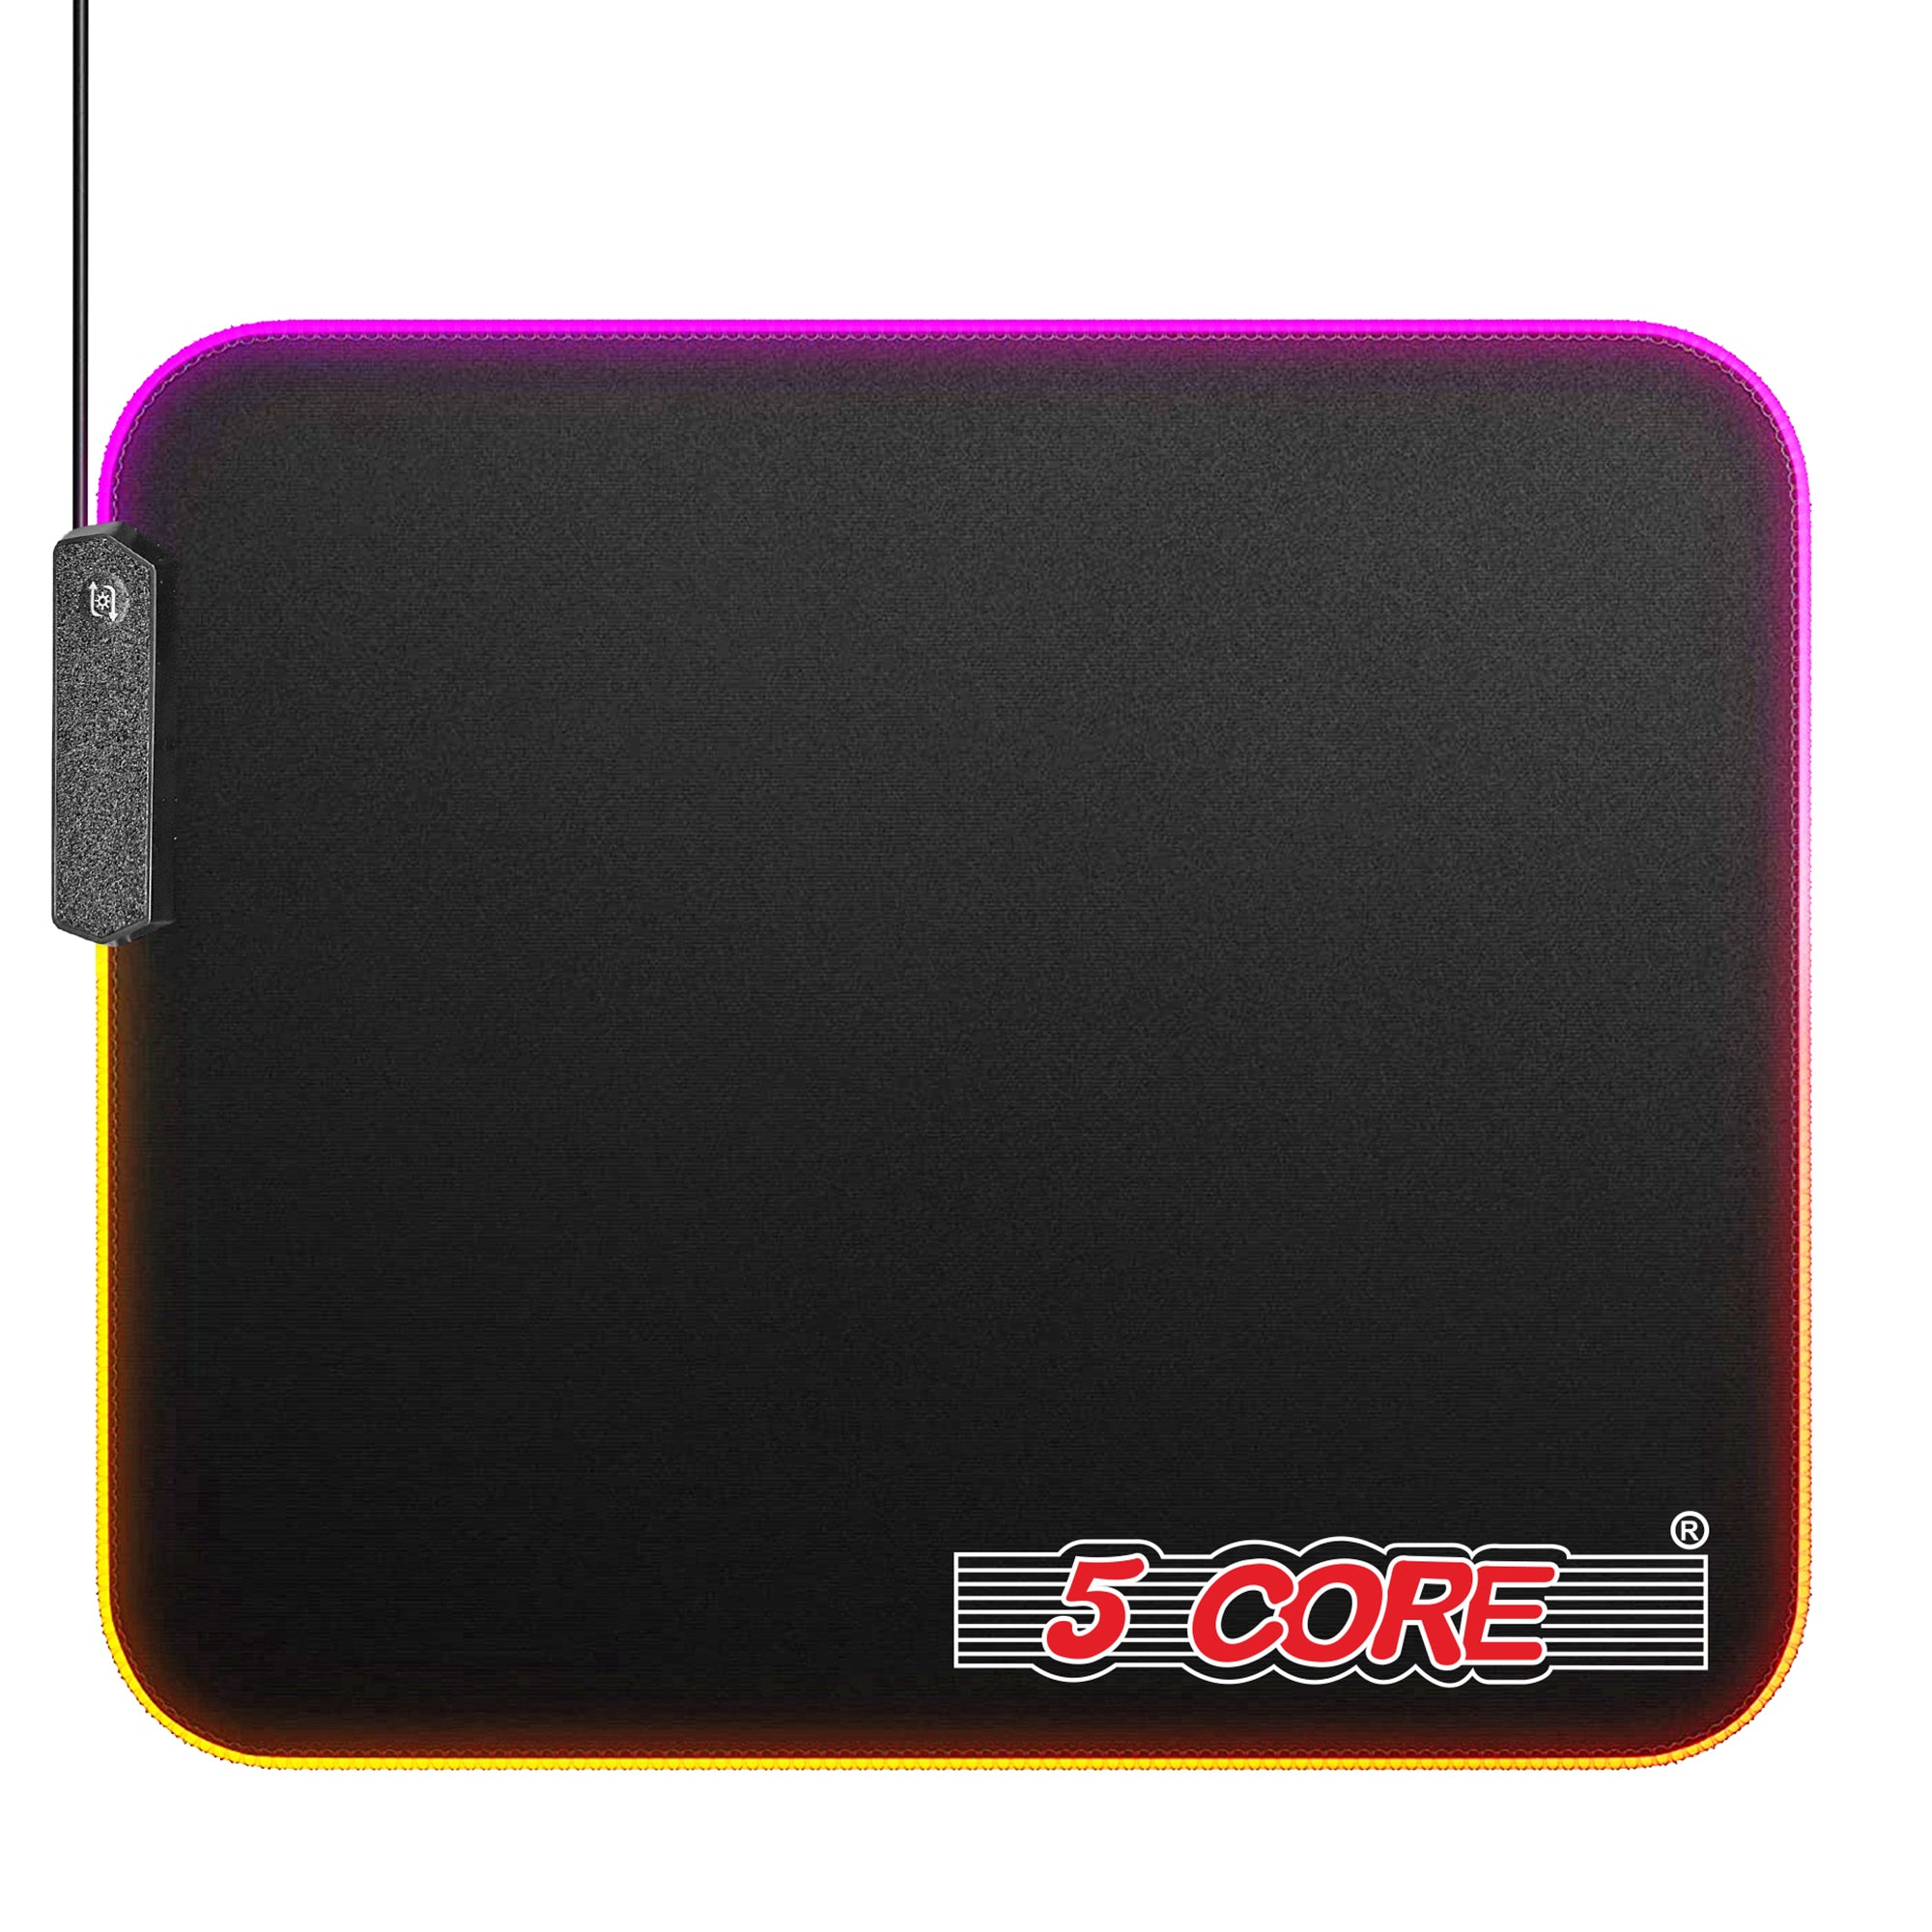 5 Core Gaming Mouse Pad RGB LED LightStandard Size with Durable Stitched Edges and Non-Slip Rubber Base Large Gaming Desk Mouse -MP 300 RGB